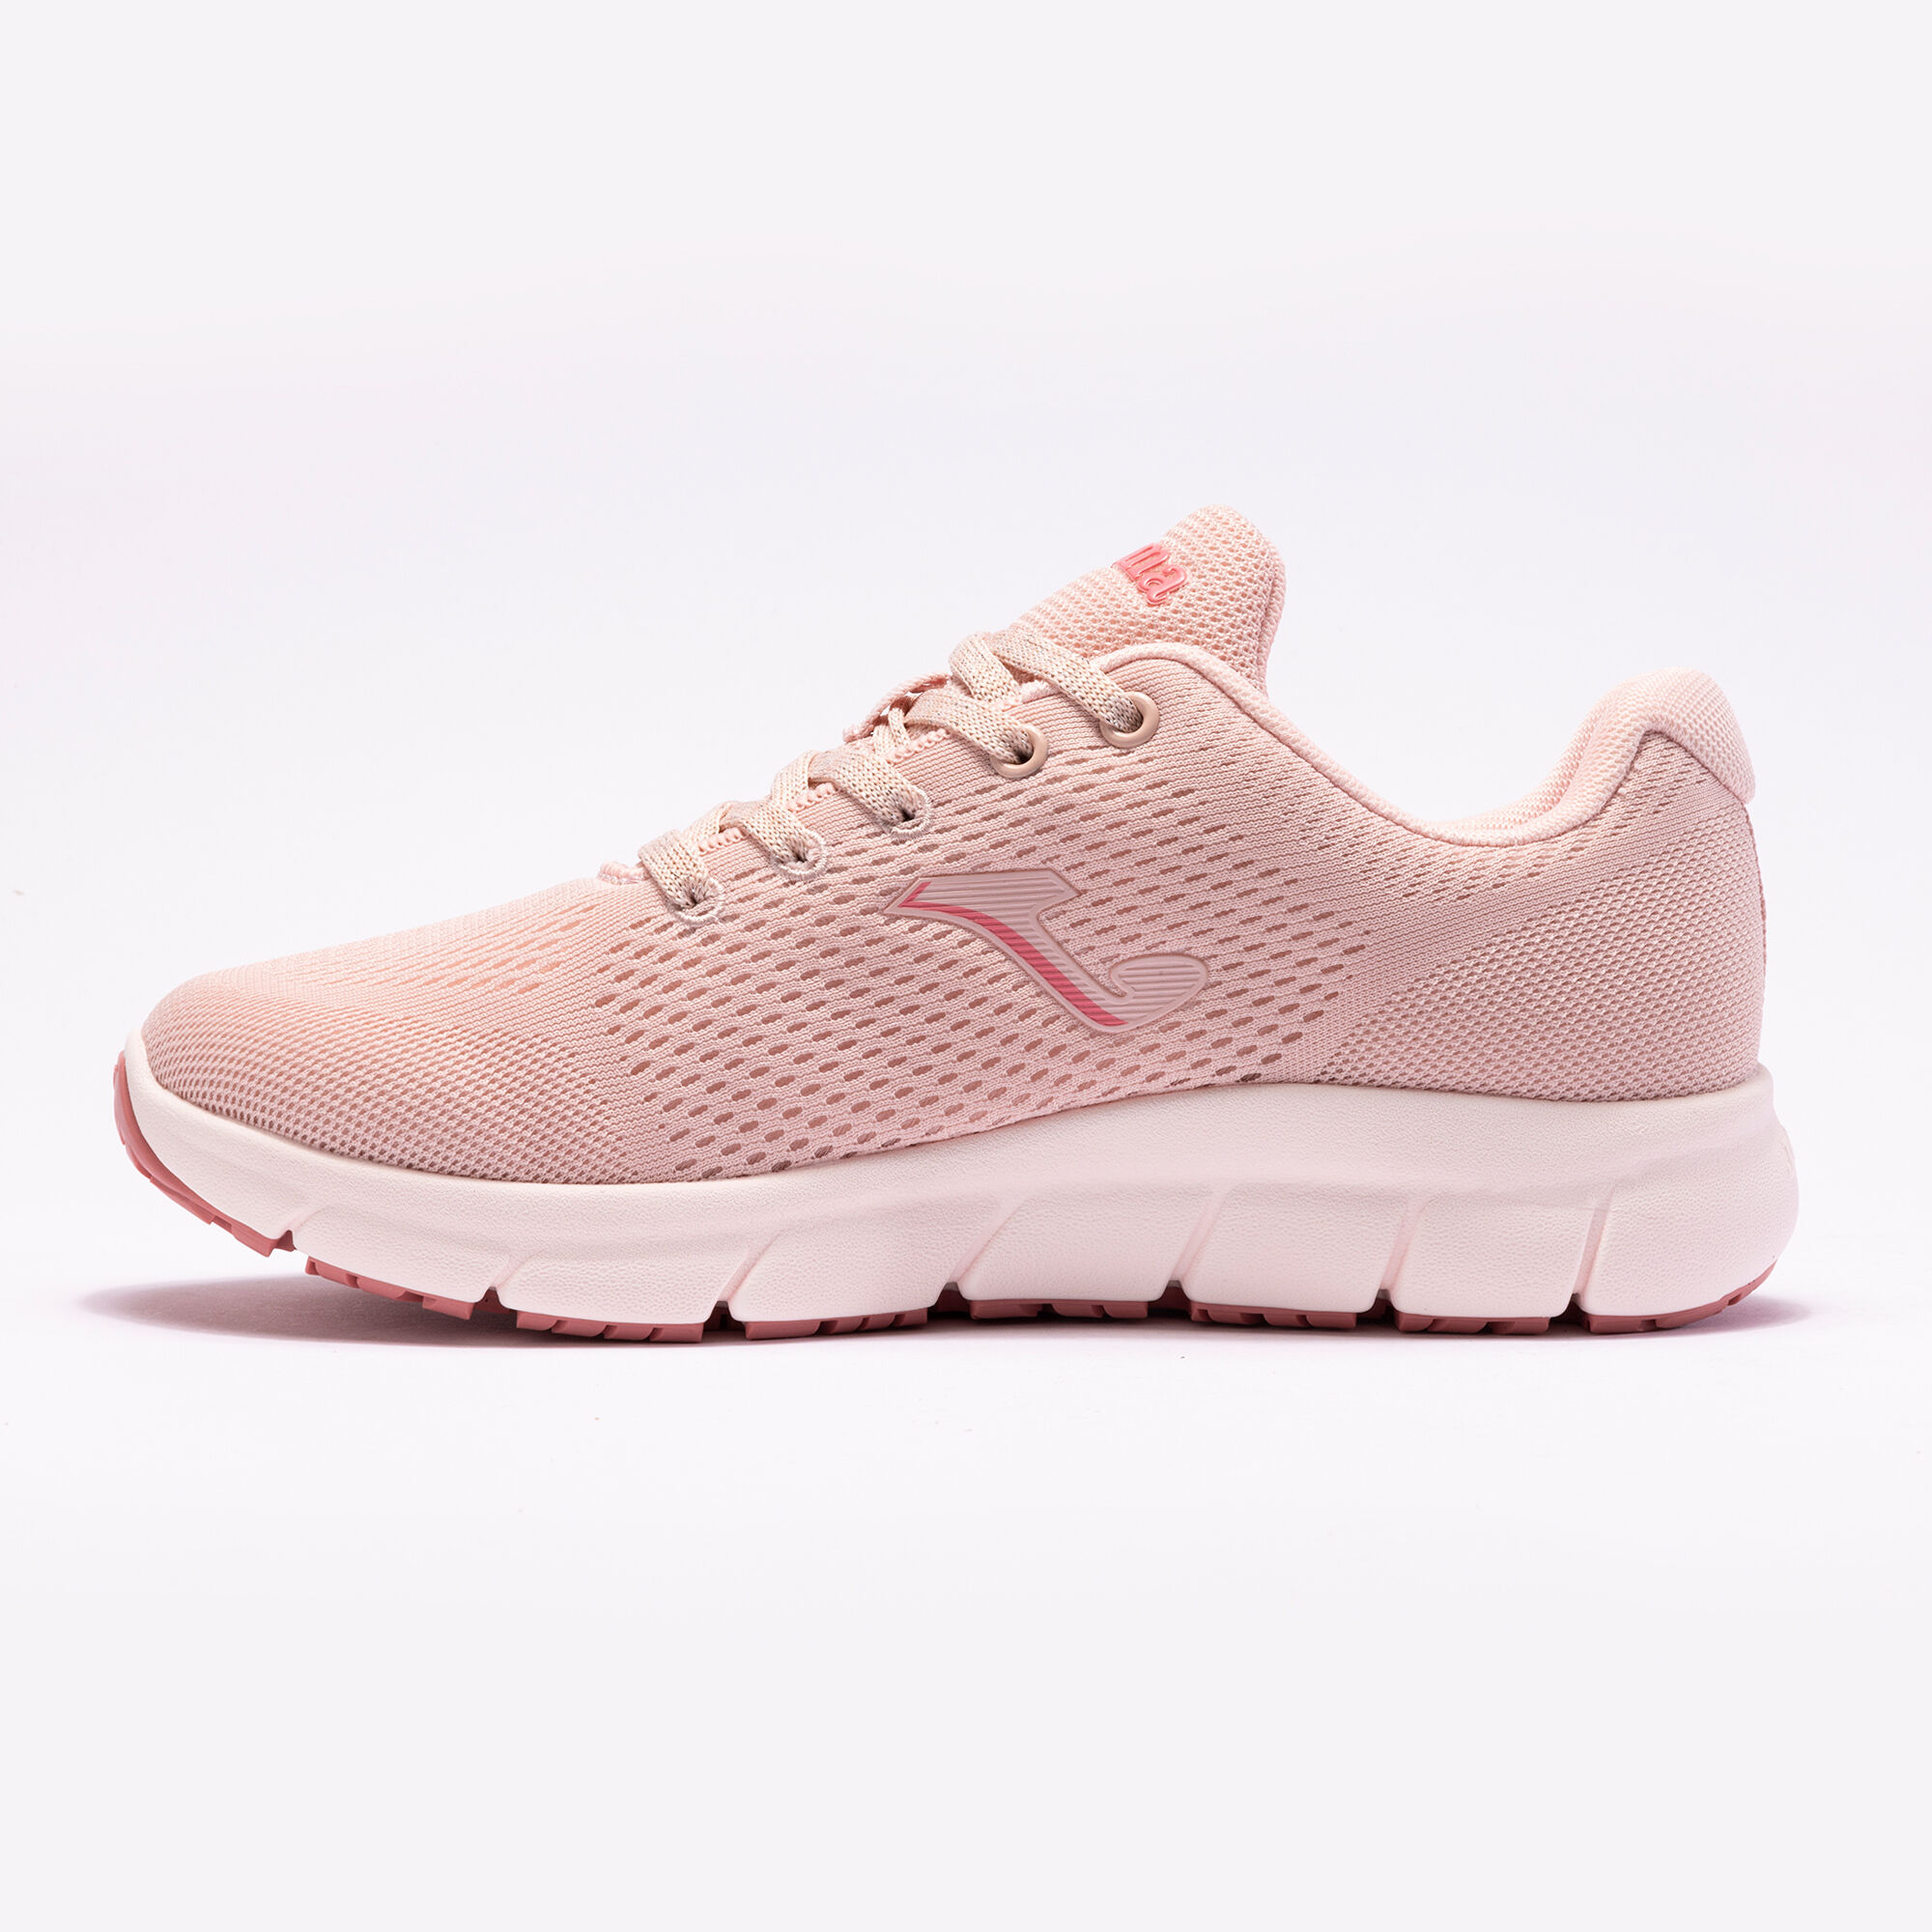 Sapatilhas casual Zen Lady 24 mulher rosa claro